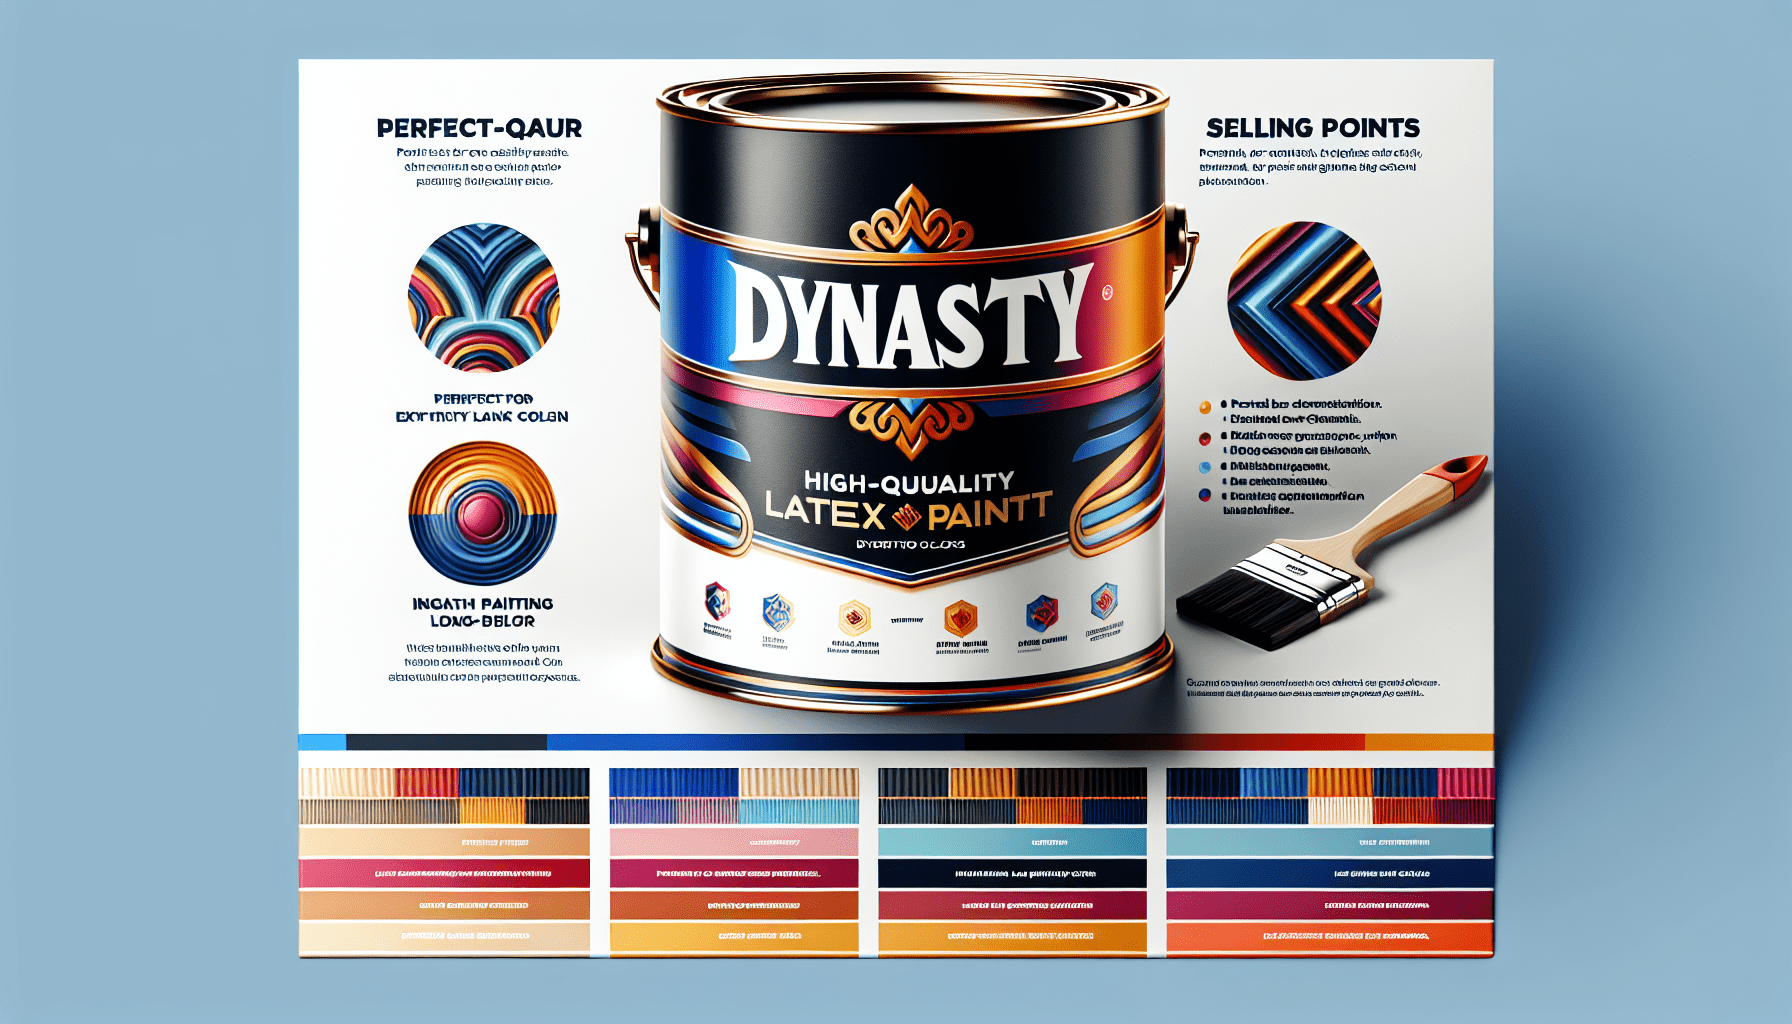 Is Behr Dynasty Latex Paint